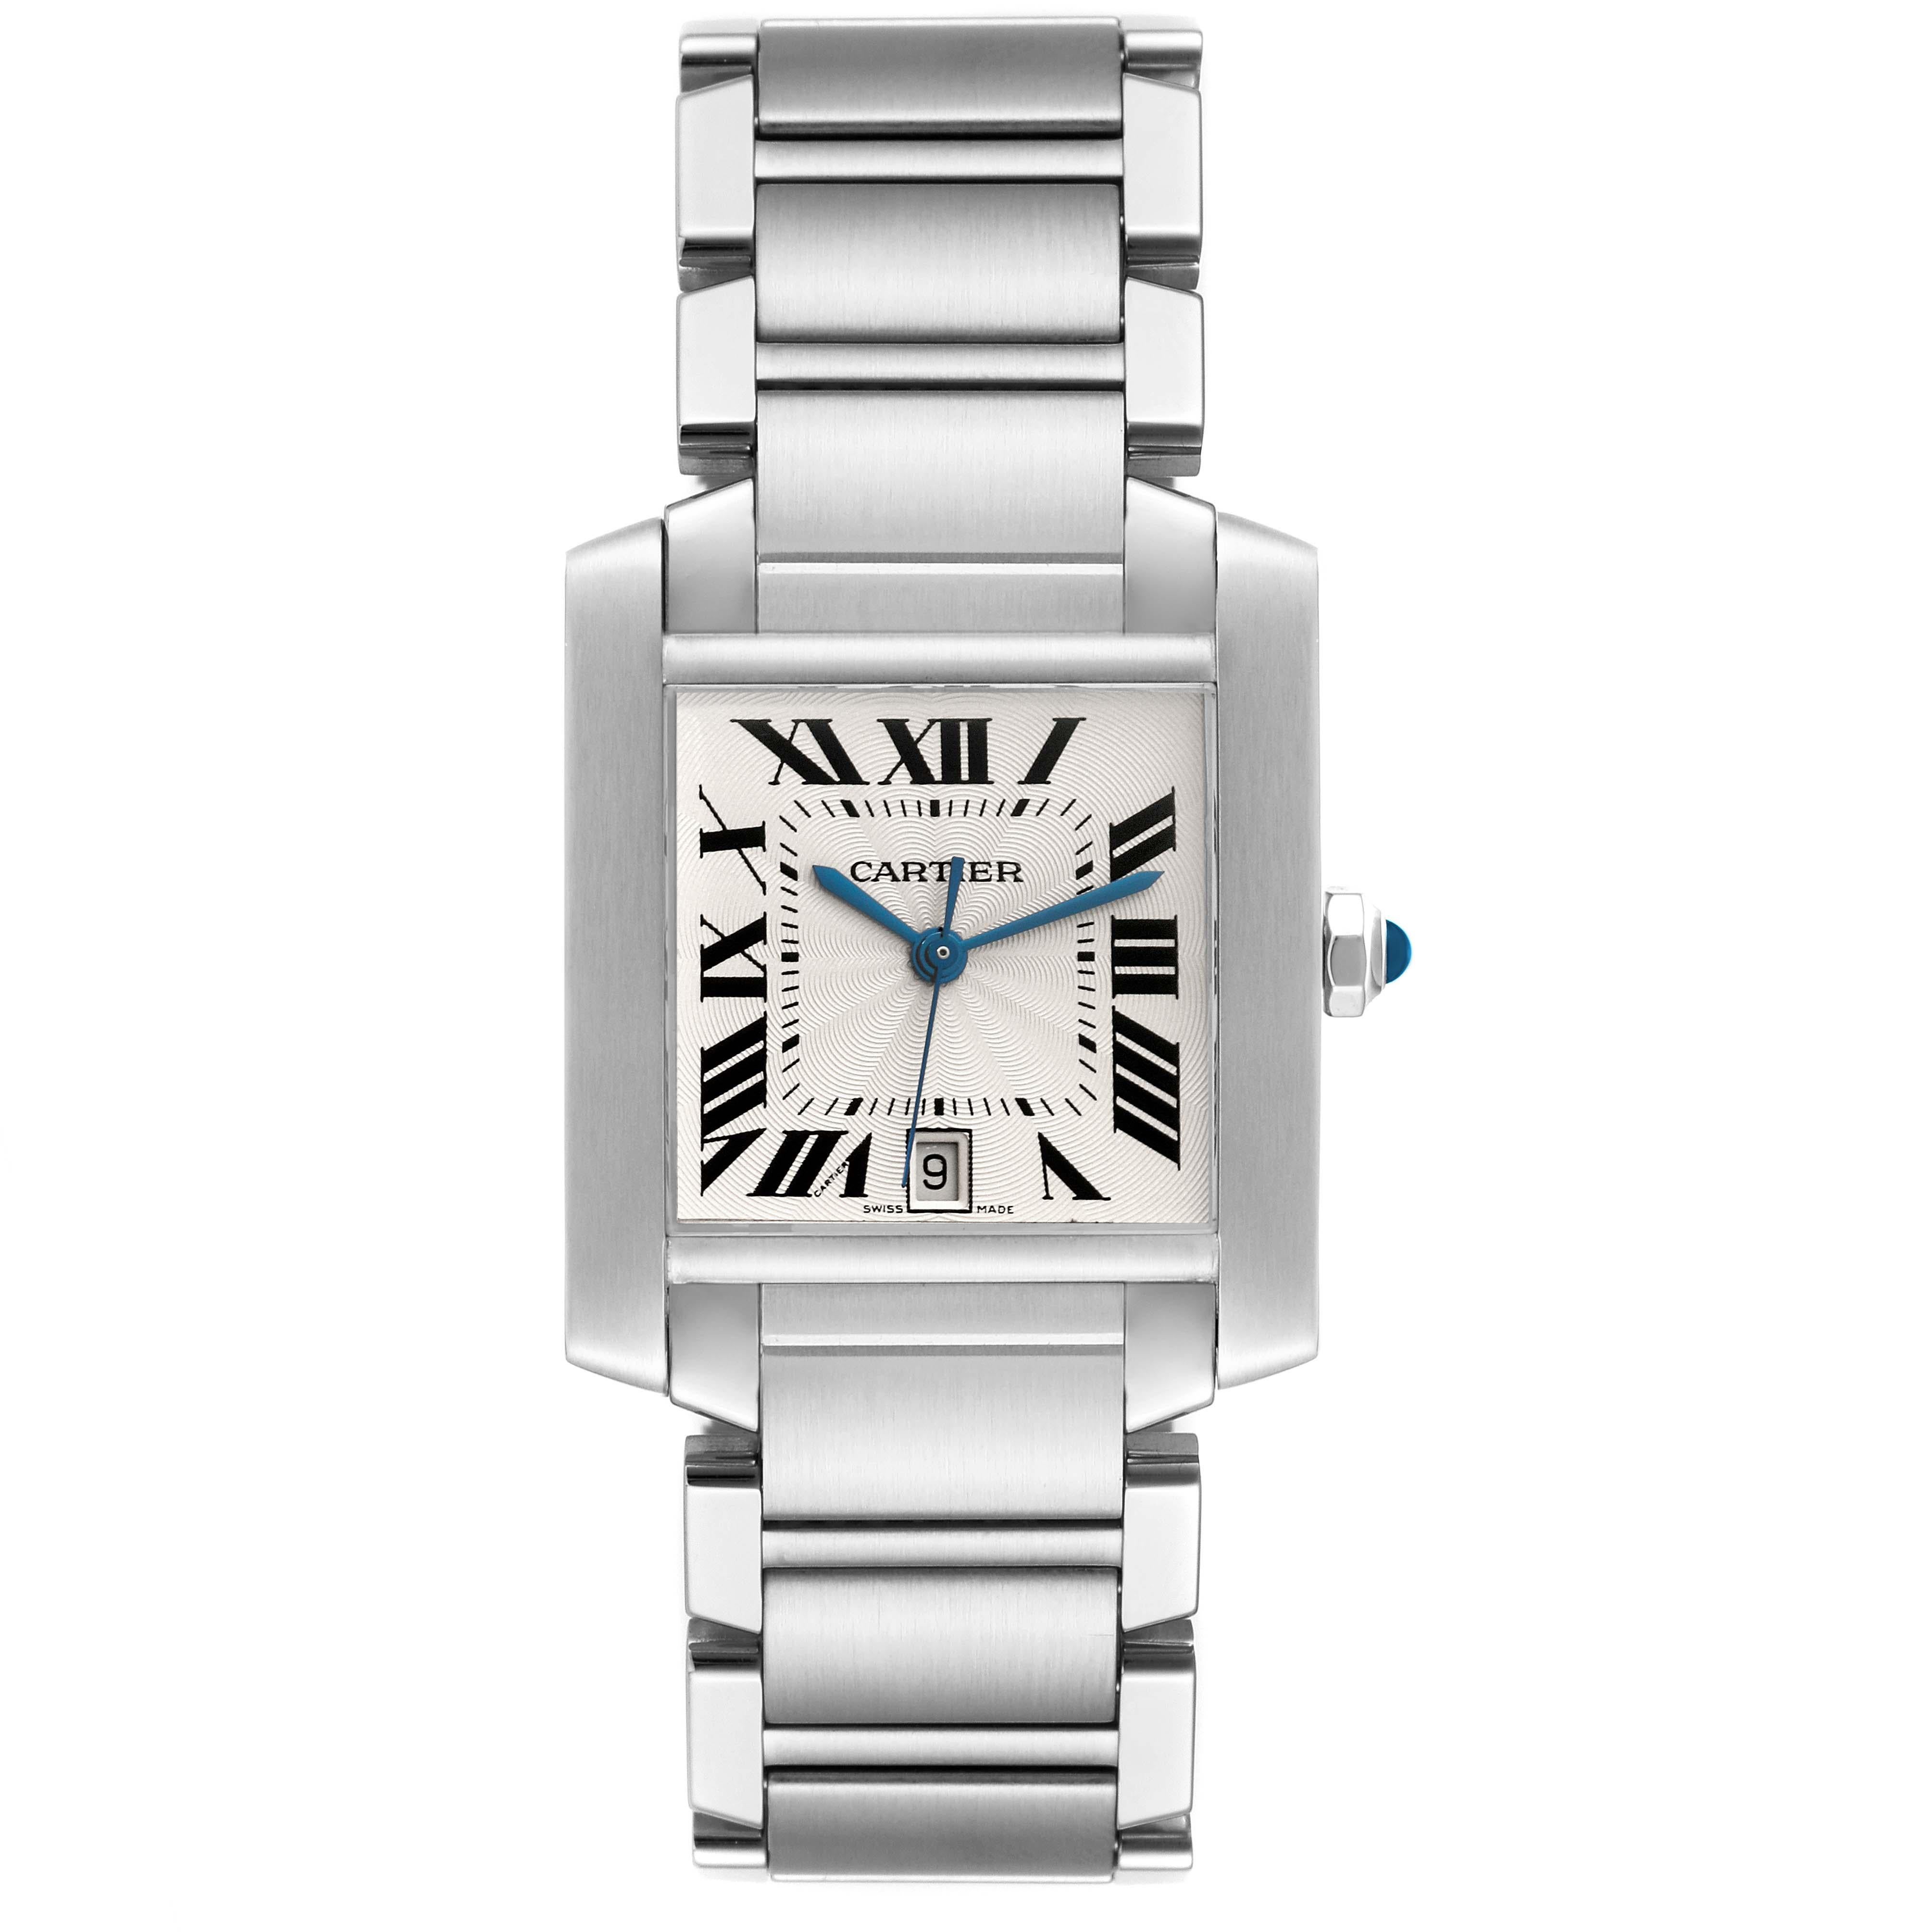 Cartier Tank Francaise Large Automatic Steel Mens Watch W51002Q3 In Excellent Condition For Sale In Atlanta, GA